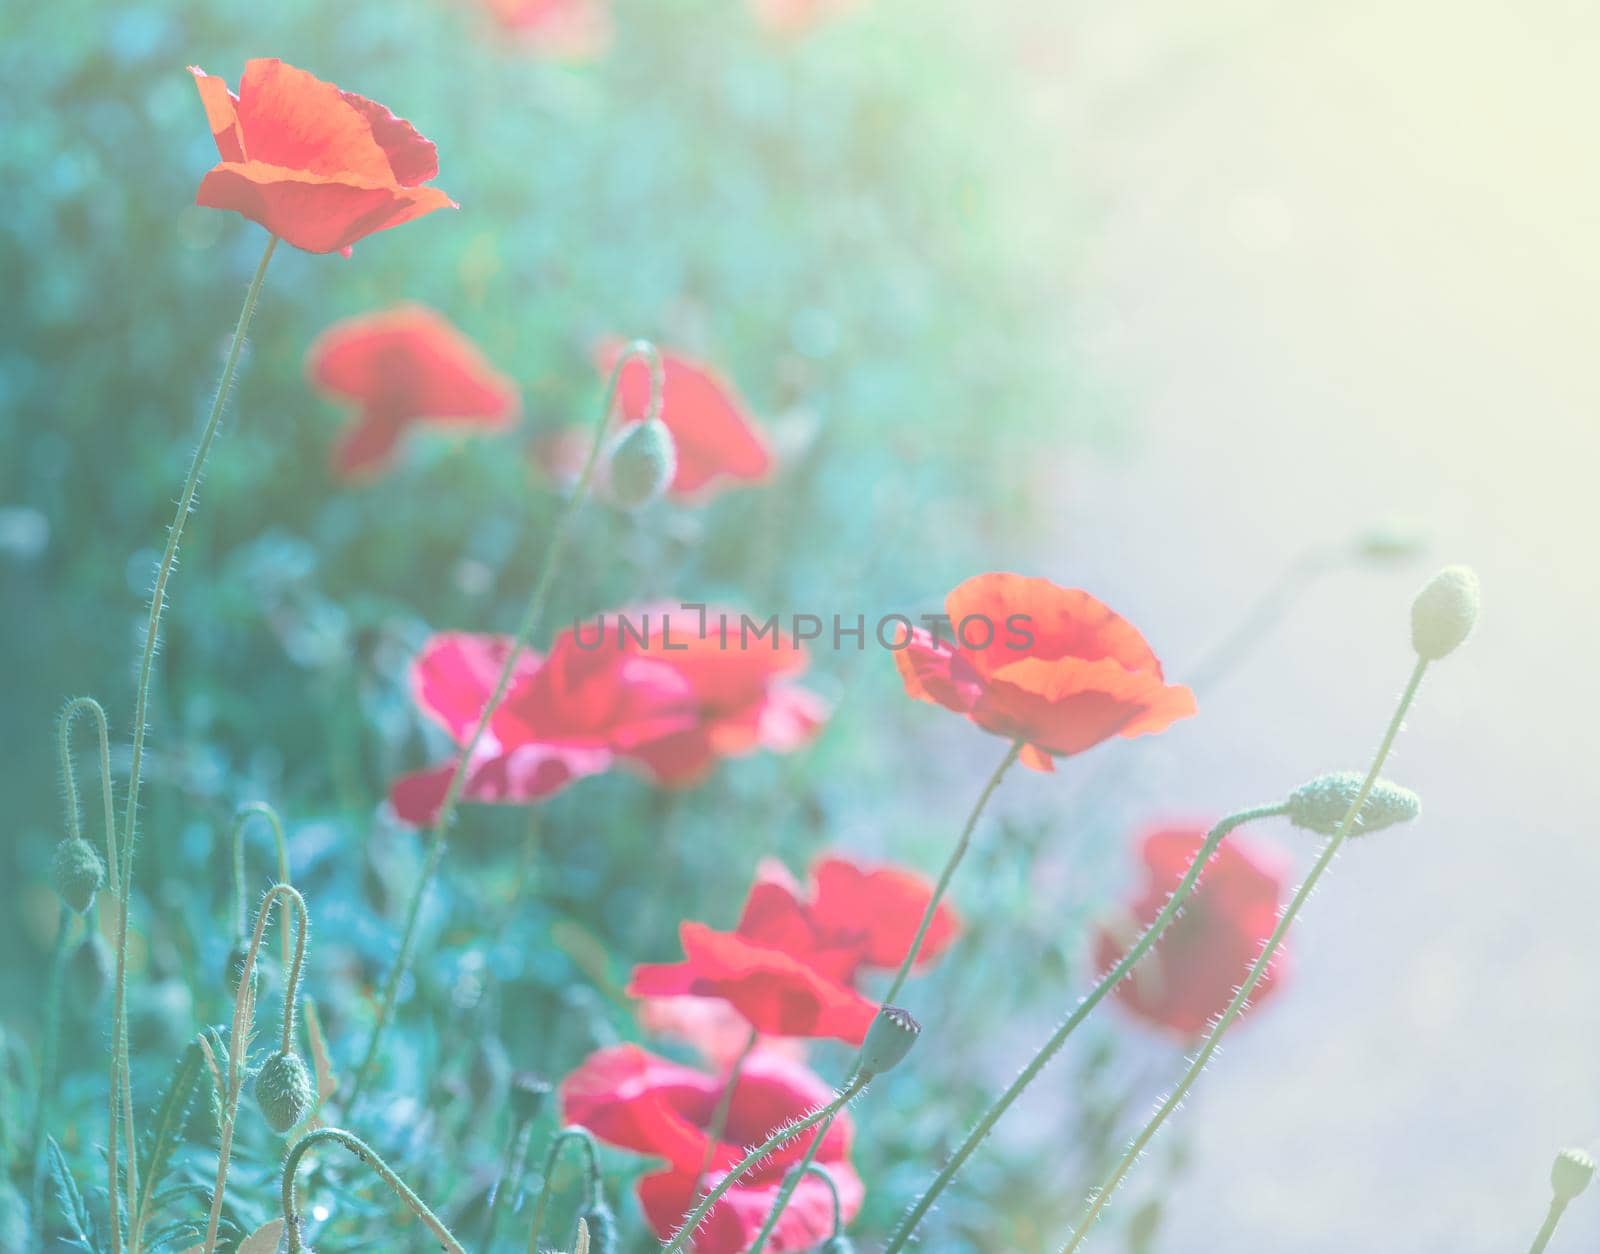 large beautiful red poppy buds on green background of grass and plants, toned image.